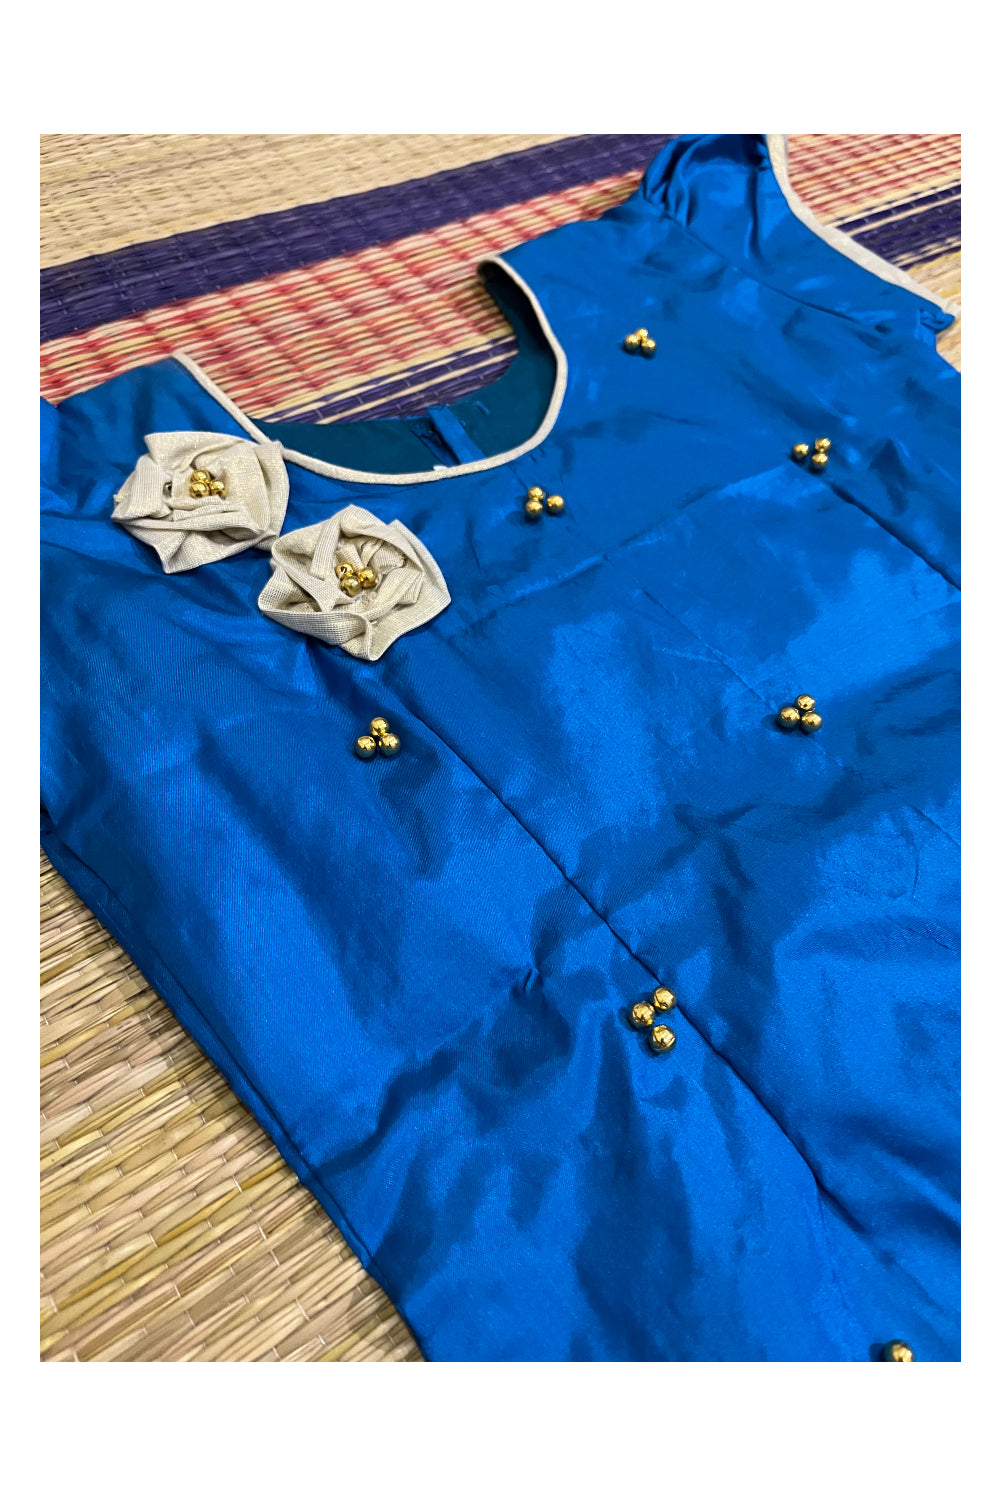 Southloom Kerala Blue Pavada Blouse with Bead Work for Kids (Age 1 - 10)